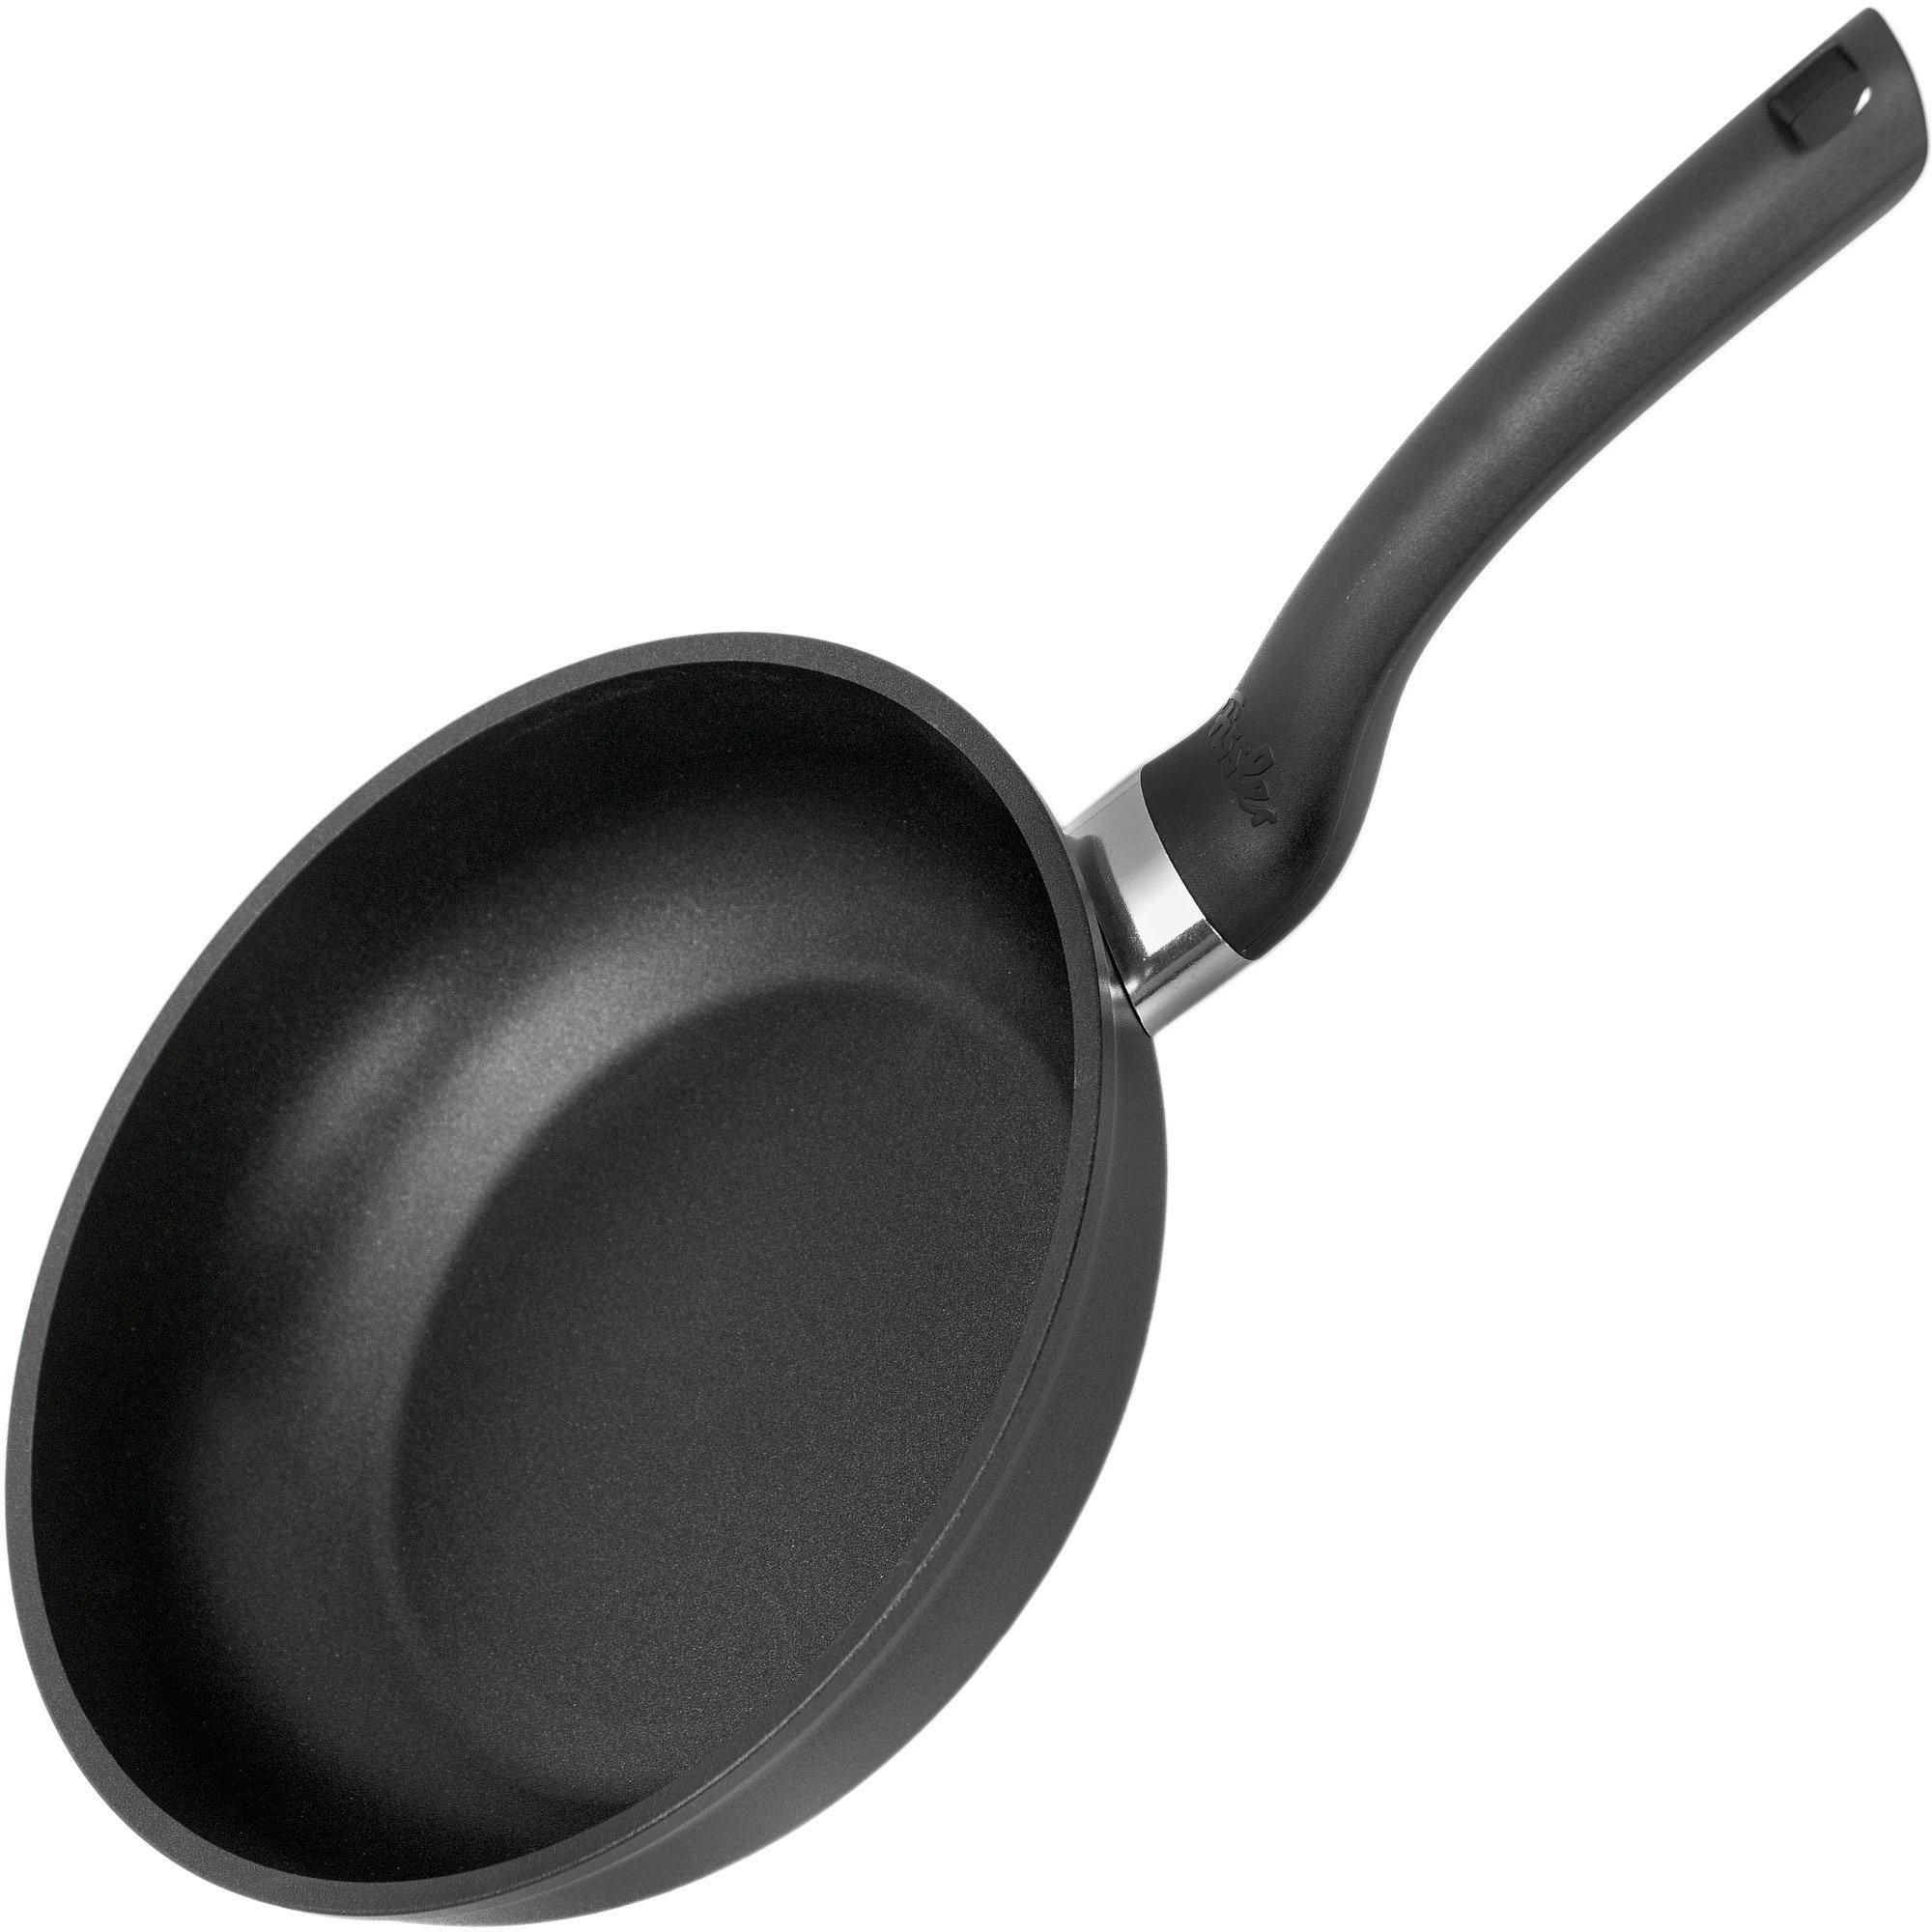 28 pan at frying 045-301-28-100, Advantageously Cenit | cm shopping Fissler Induction